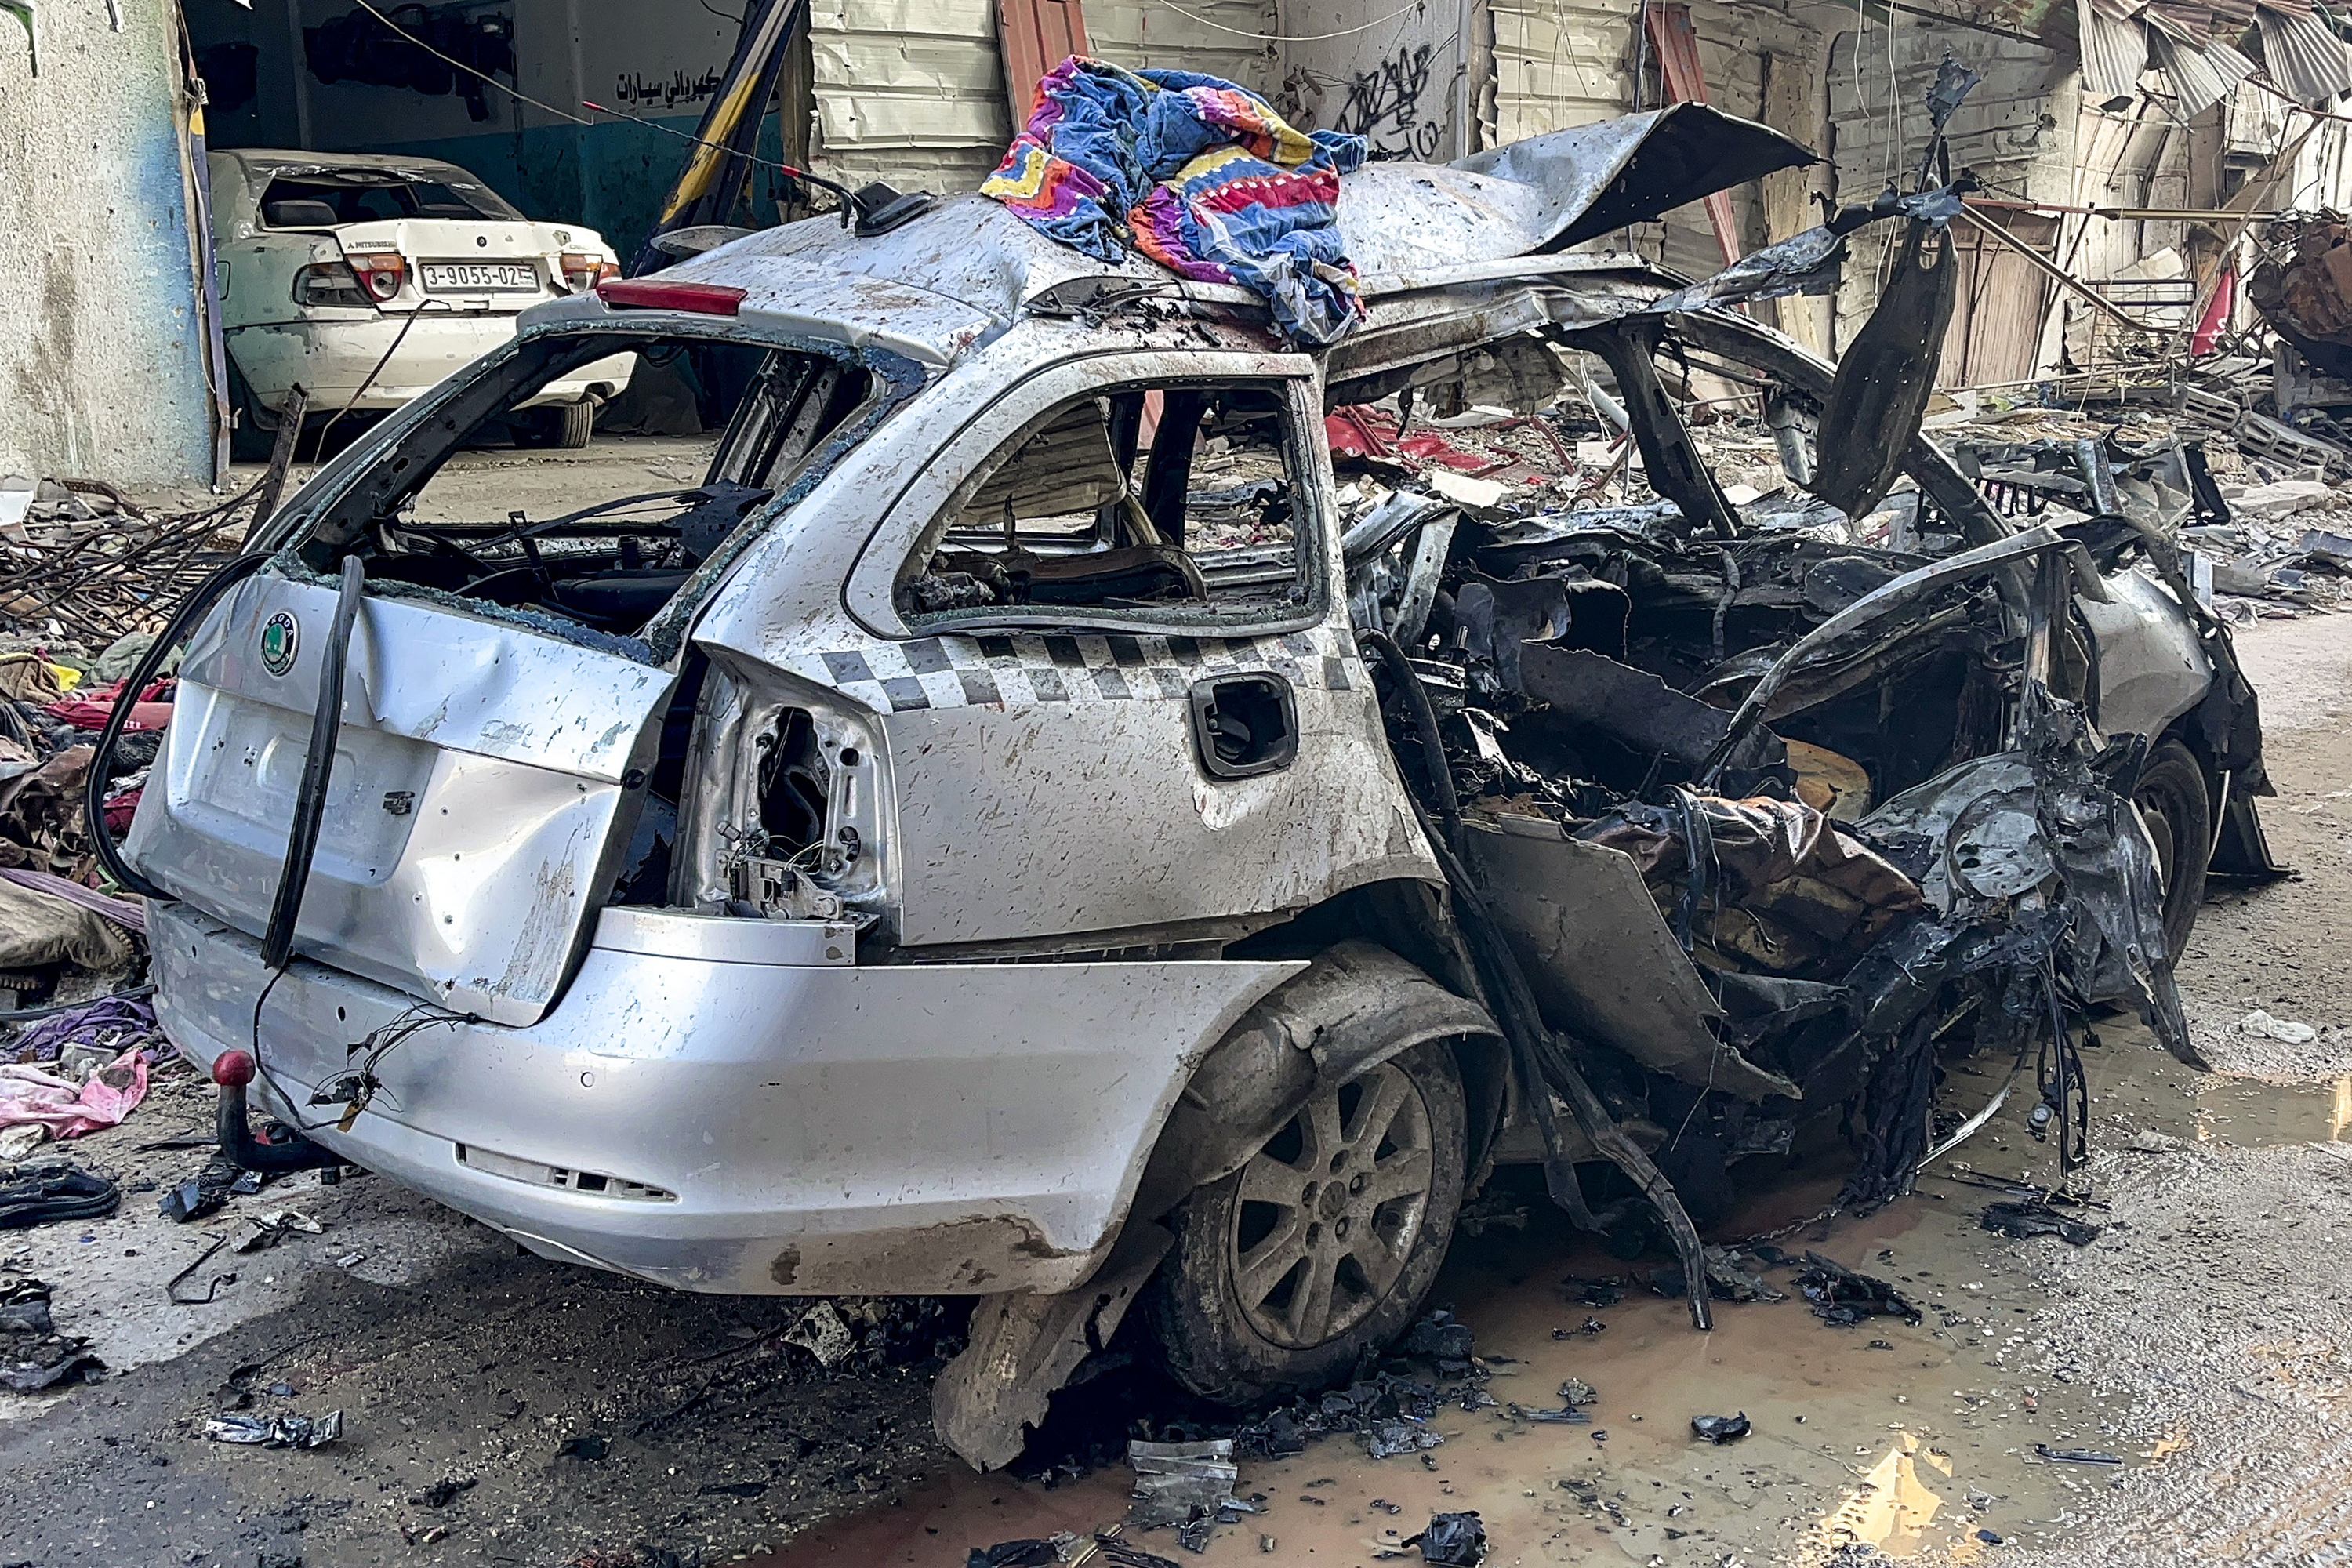 The car in which three sons of Hamas leader Ismail Haniyeh were reportedly killed in an Israeli air strike is pictured near Al Shati, northwest of Gaza City, on April 10.